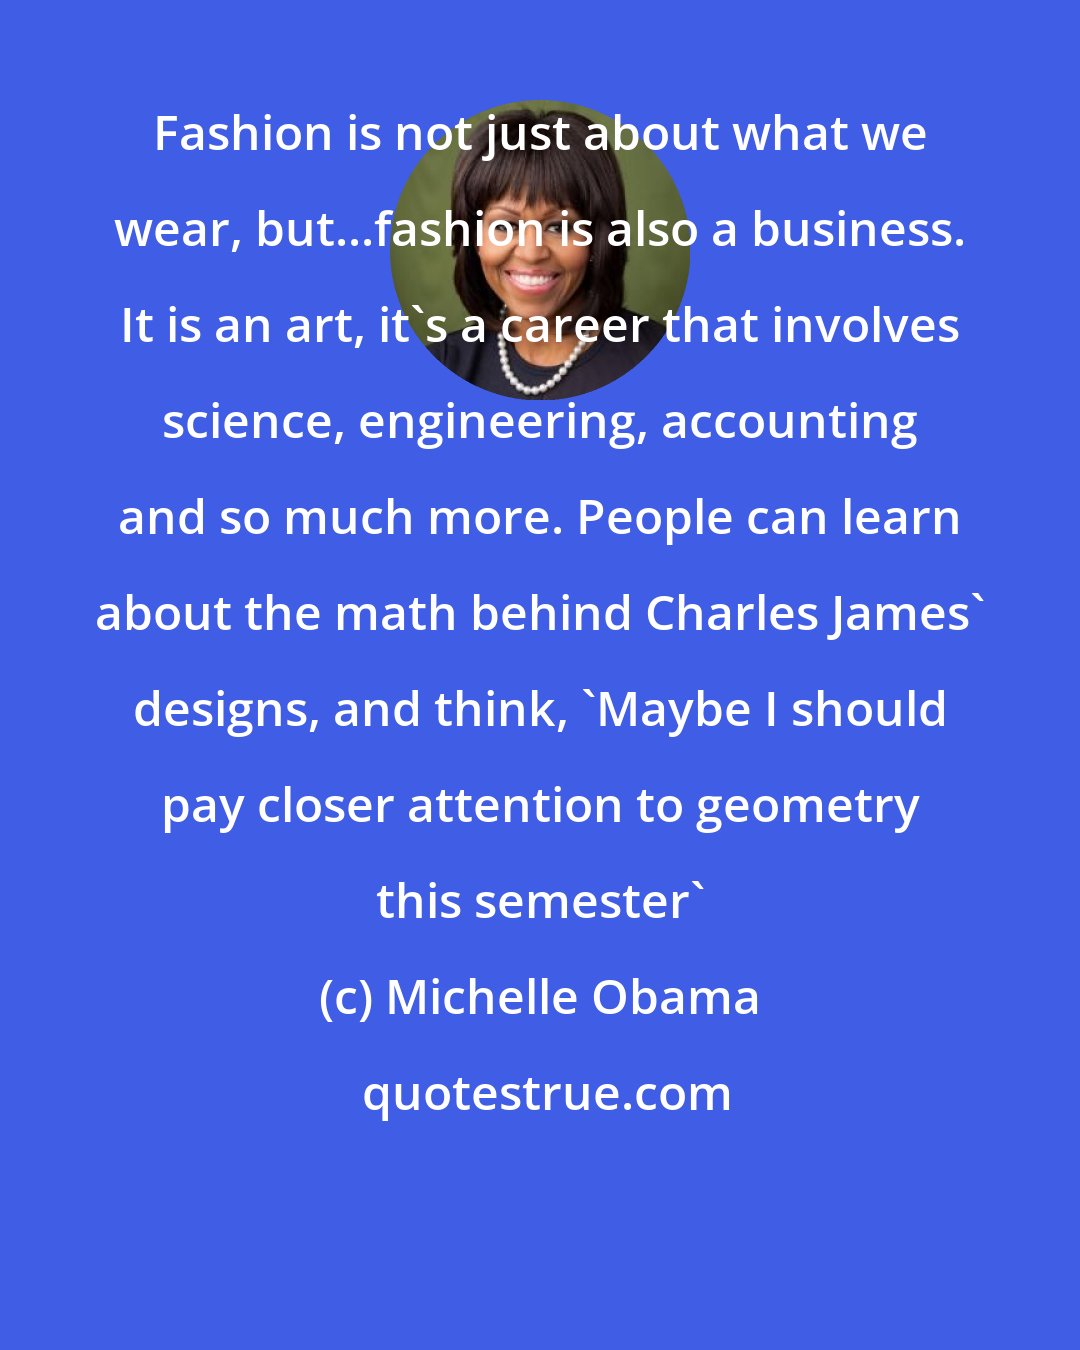 Michelle Obama: Fashion is not just about what we wear, but...fashion is also a business. It is an art, it's a career that involves science, engineering, accounting and so much more. People can learn about the math behind Charles James' designs, and think, 'Maybe I should pay closer attention to geometry this semester'